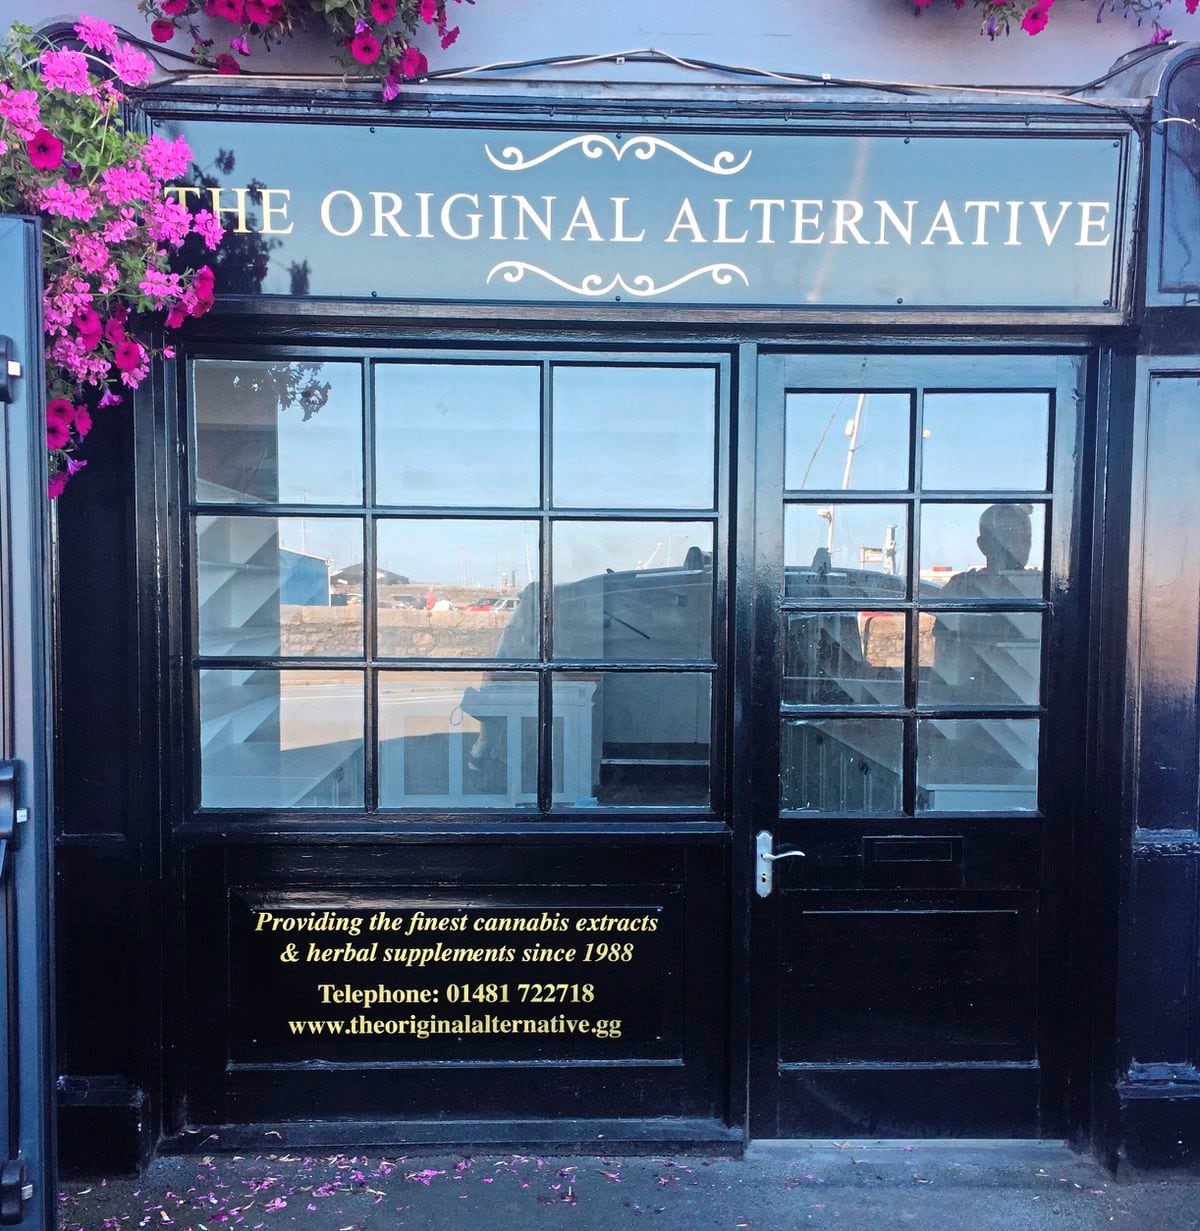 The Original Alternative will open its shop in the centre of Town on Monday selling organic CBD oils, six months after restrictions were lifted on the sale of certain products. (Picture by Aaron Carpenter 22215898)